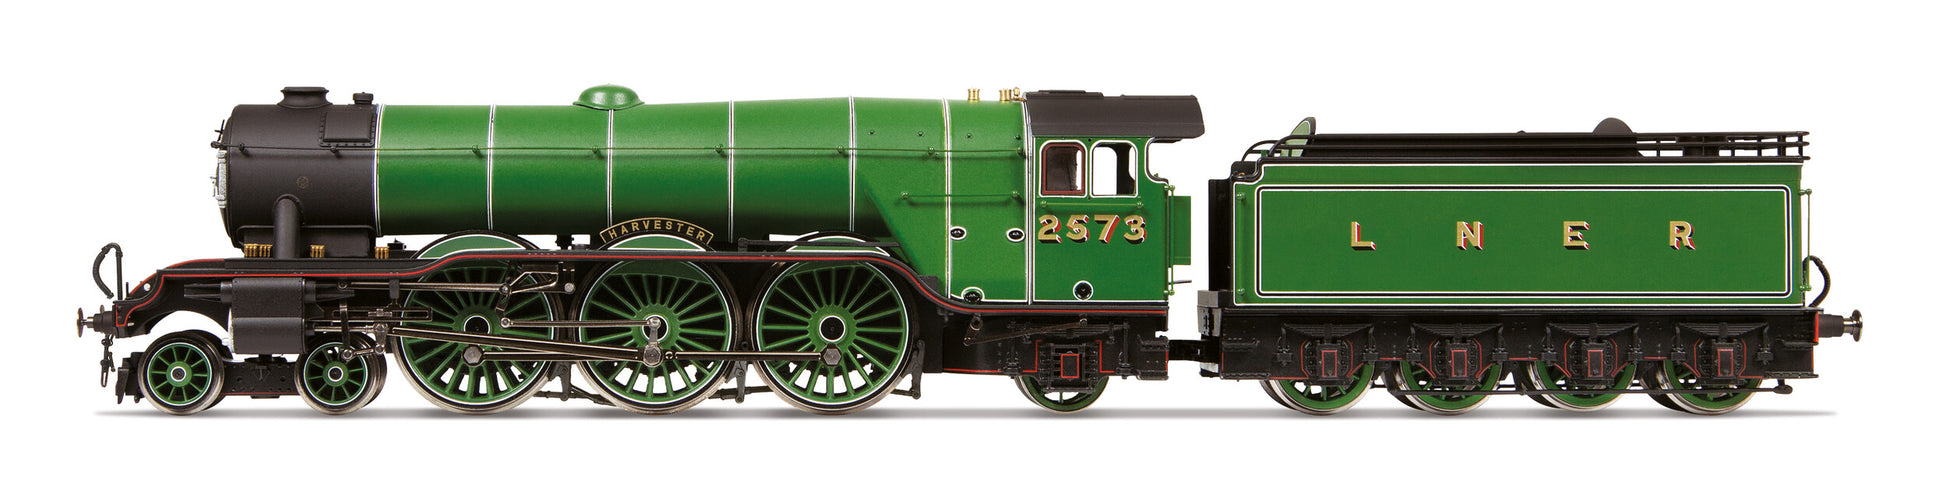 SALE - Hornby R30216 LNER, A3 Class, No.2573 'Harvester' (diecast footplate and flickering firebox) - Era 3 - Chester Model Centre